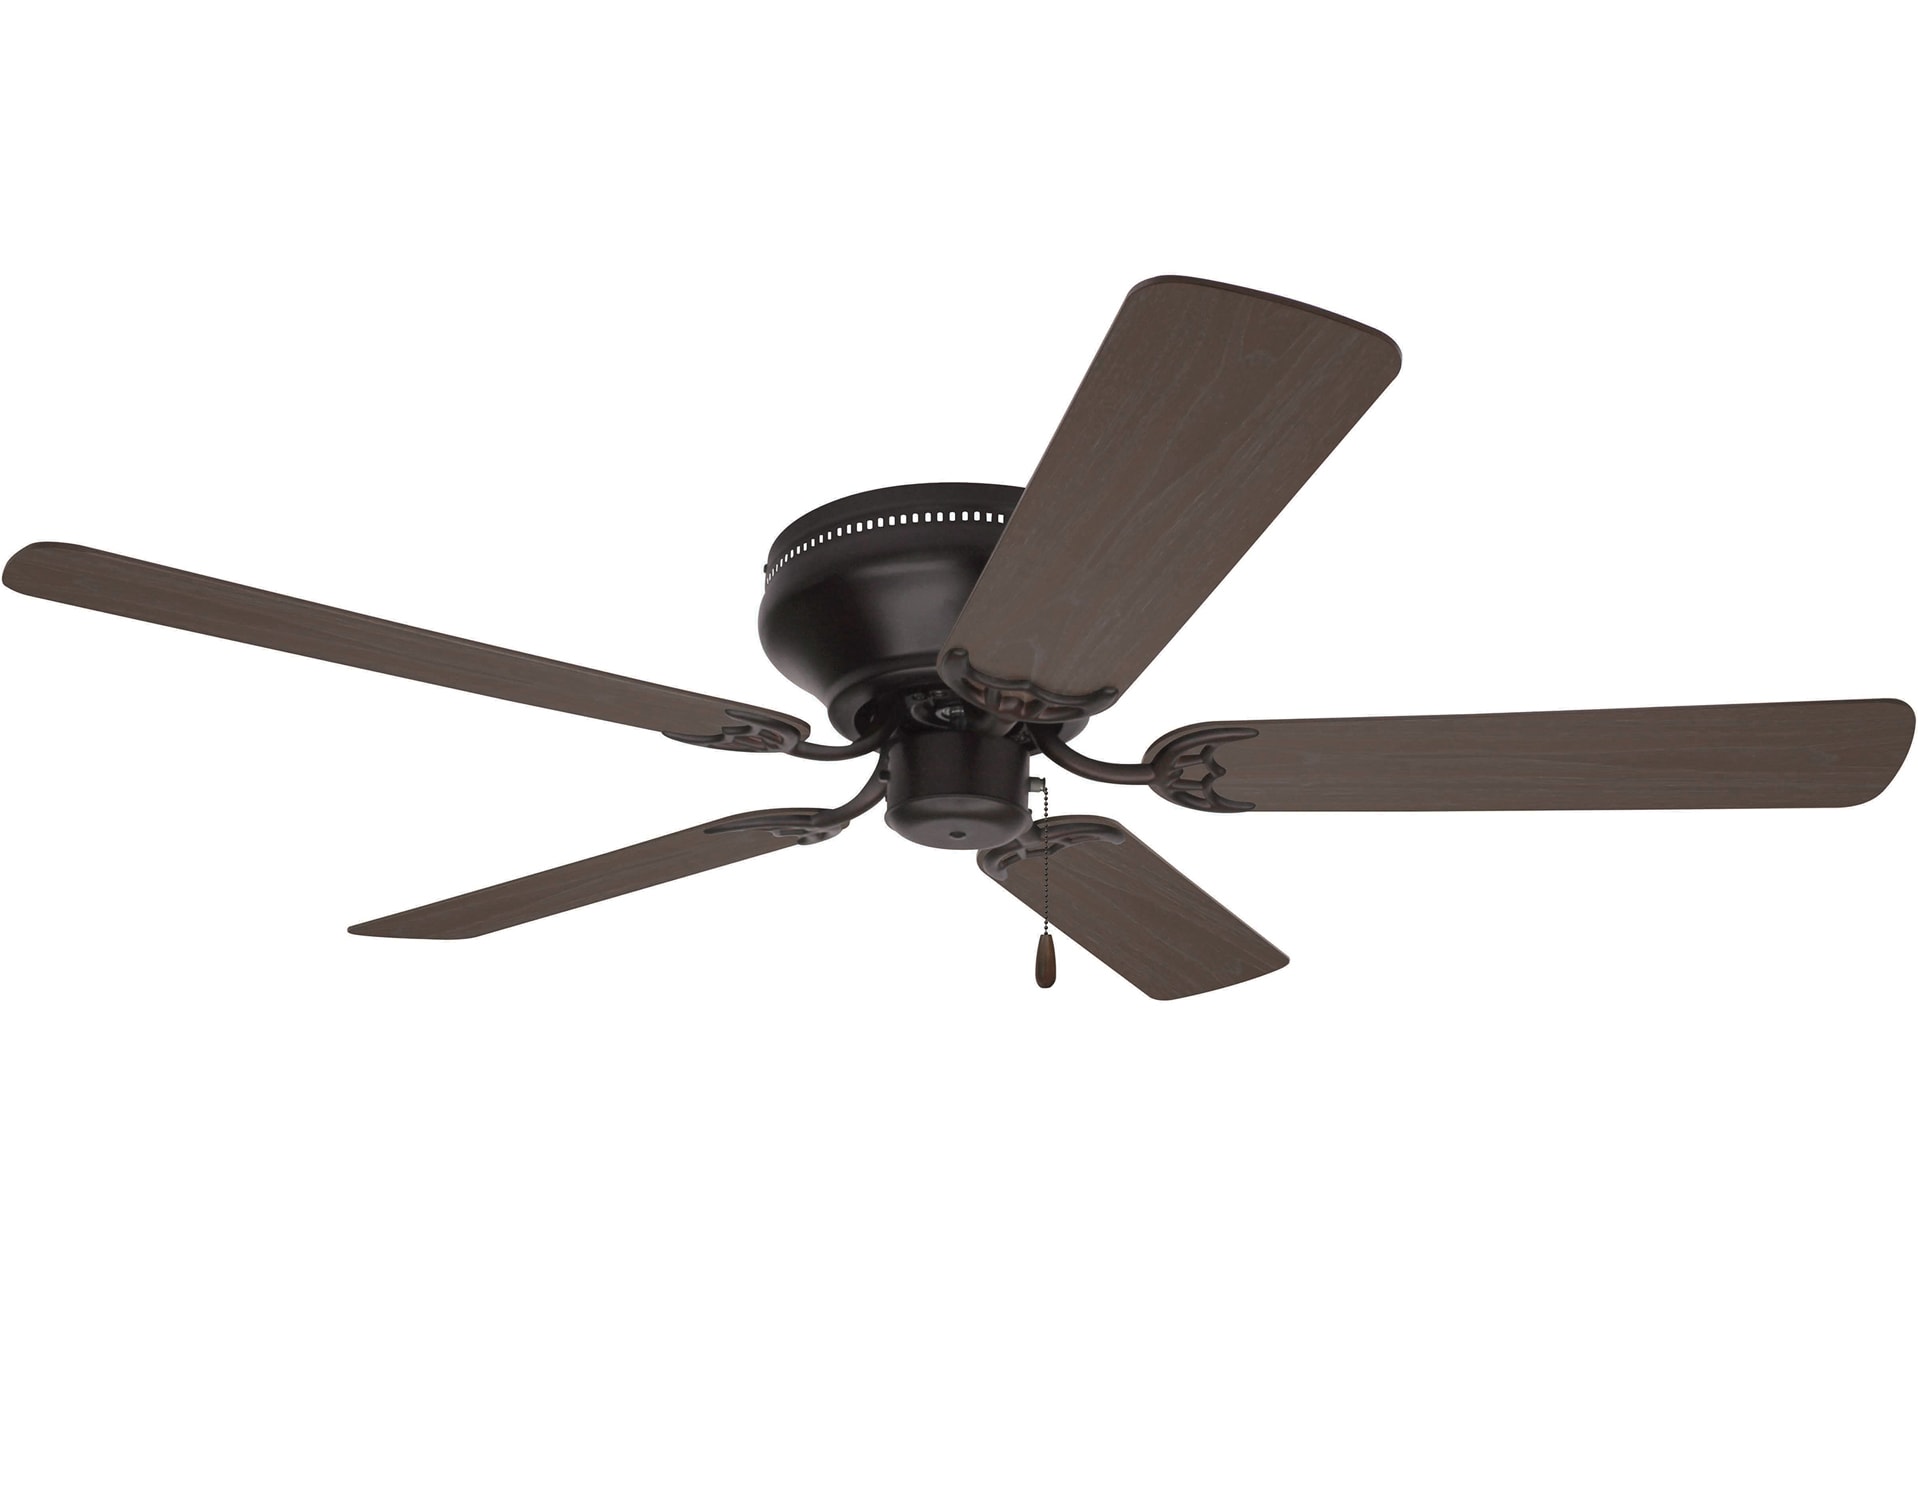 Craftmade Pfc52ob Oiled Bronze Pro Contemporary 42 52 5 Blade Flush Mount Ceiling Fan Requires Selection Lightingdirect Com - What Are Flush Mount Ceiling Fans